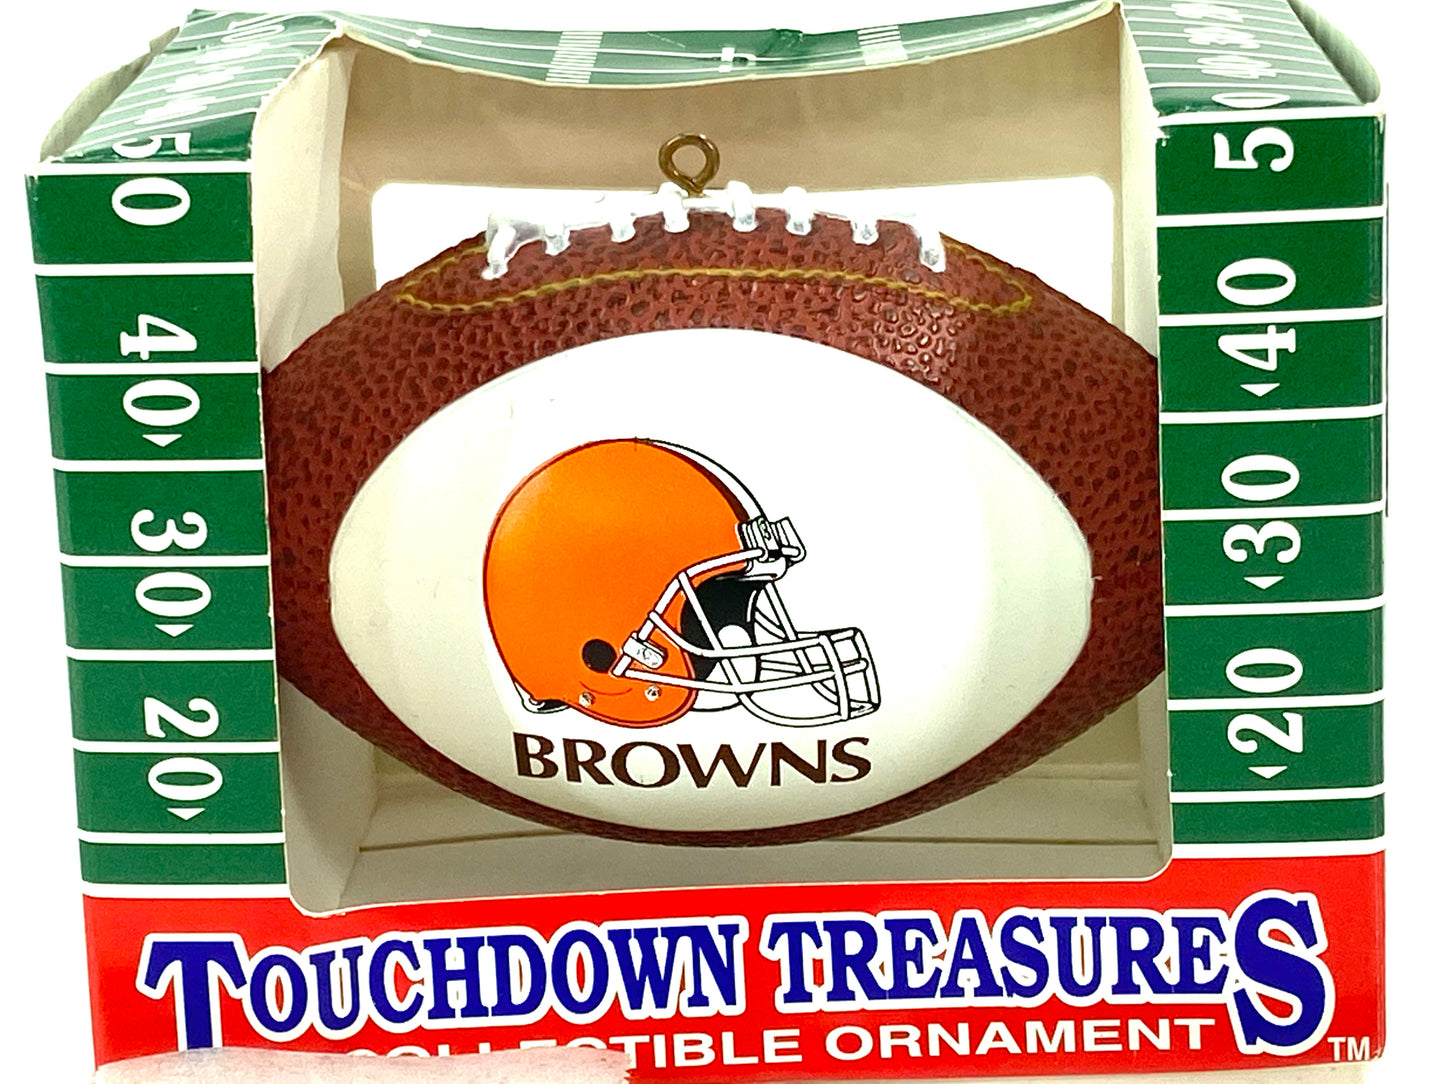 Cleveland Browns Vintage NFL Christmas Ornament By Topperscot, Inc.